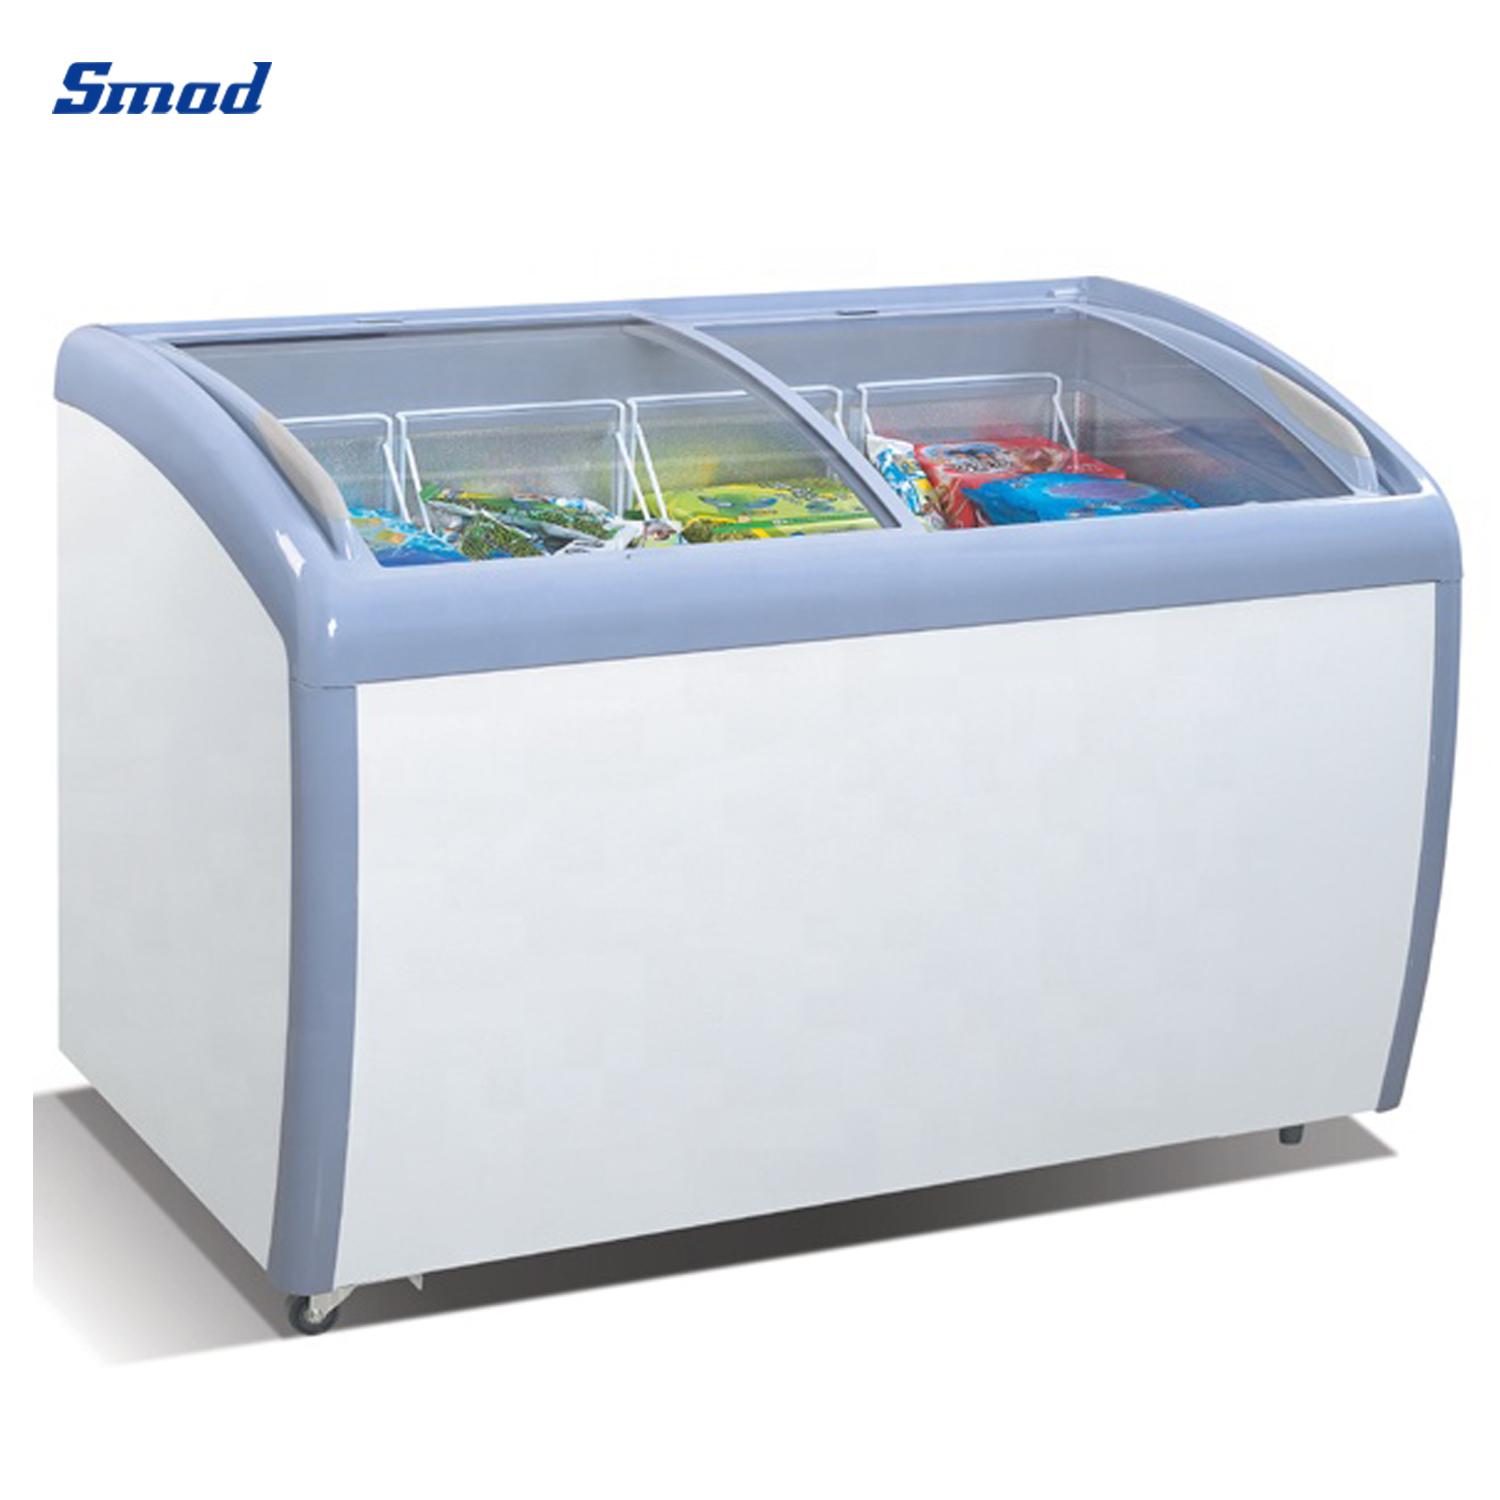 Smad Glass Top Ice Cream Deep Freezer with mechanical thermostat